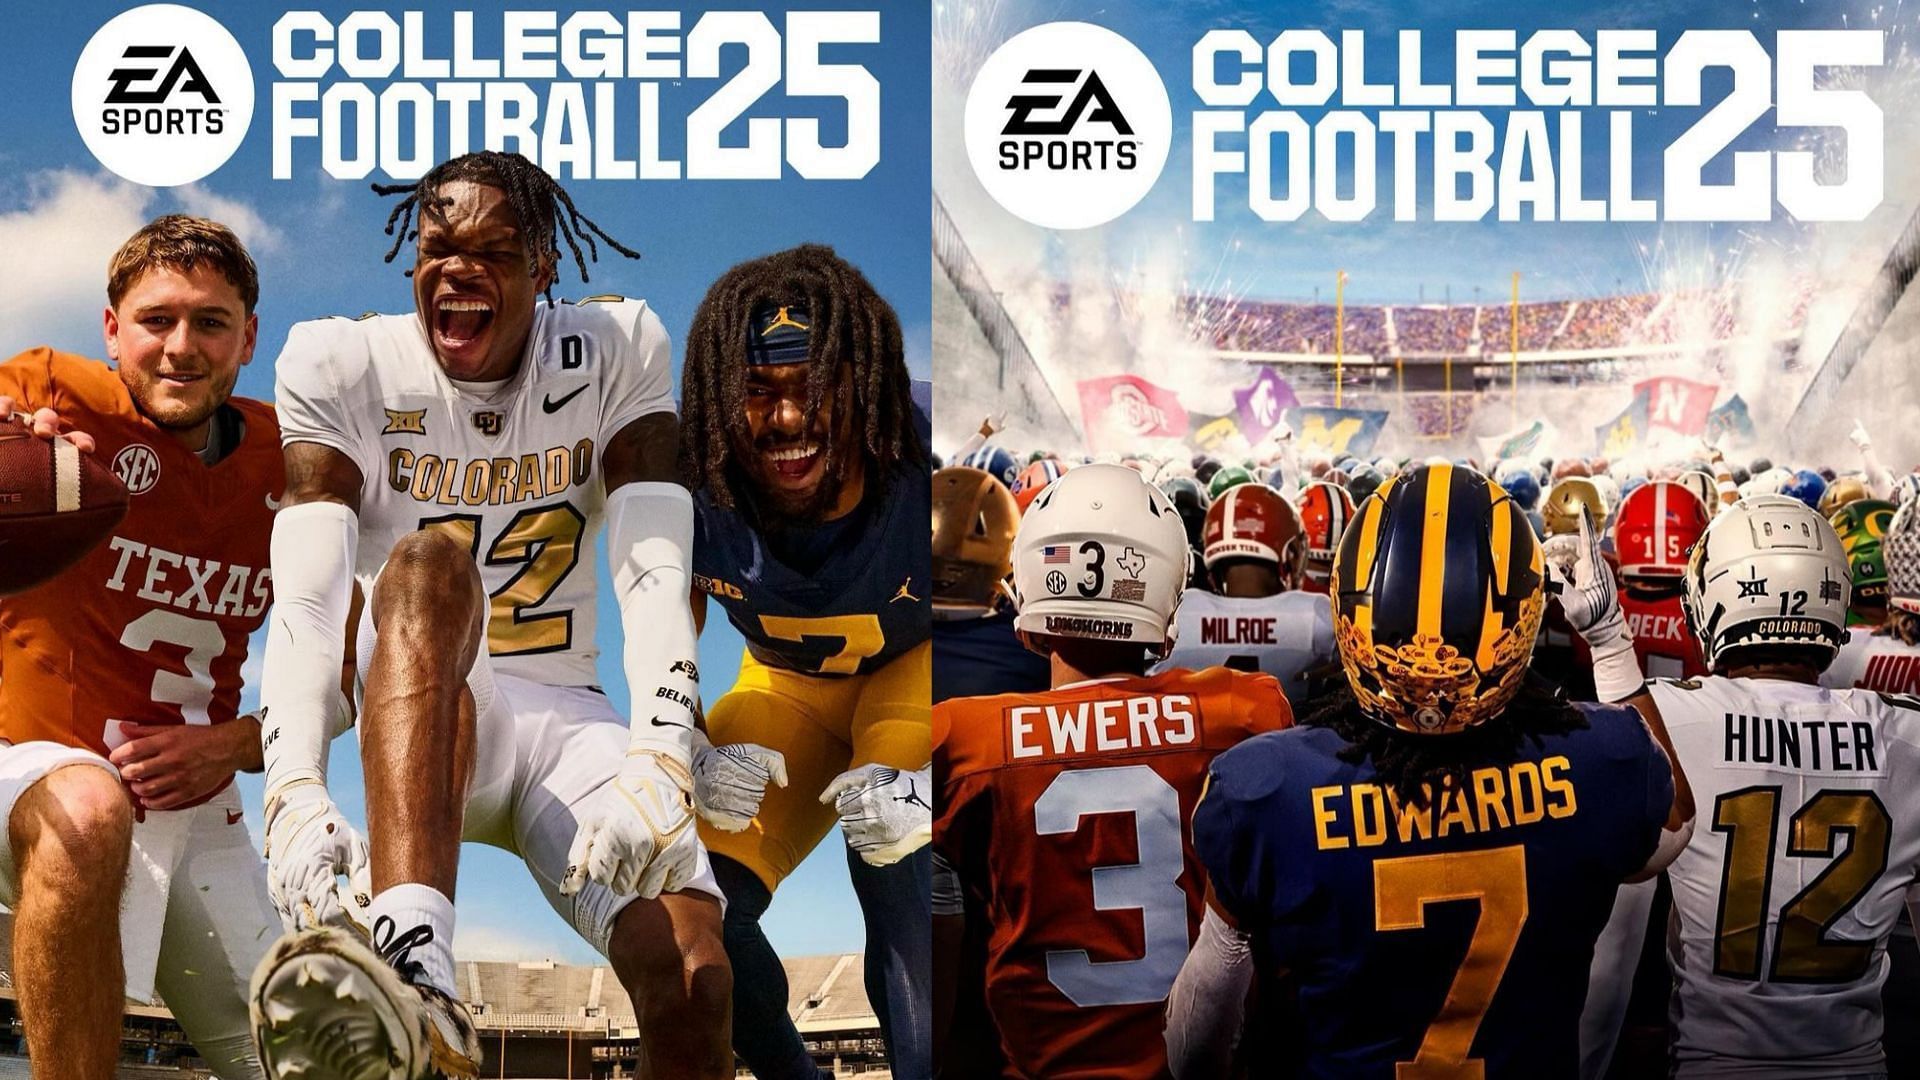 EA Sports College Football 25 game